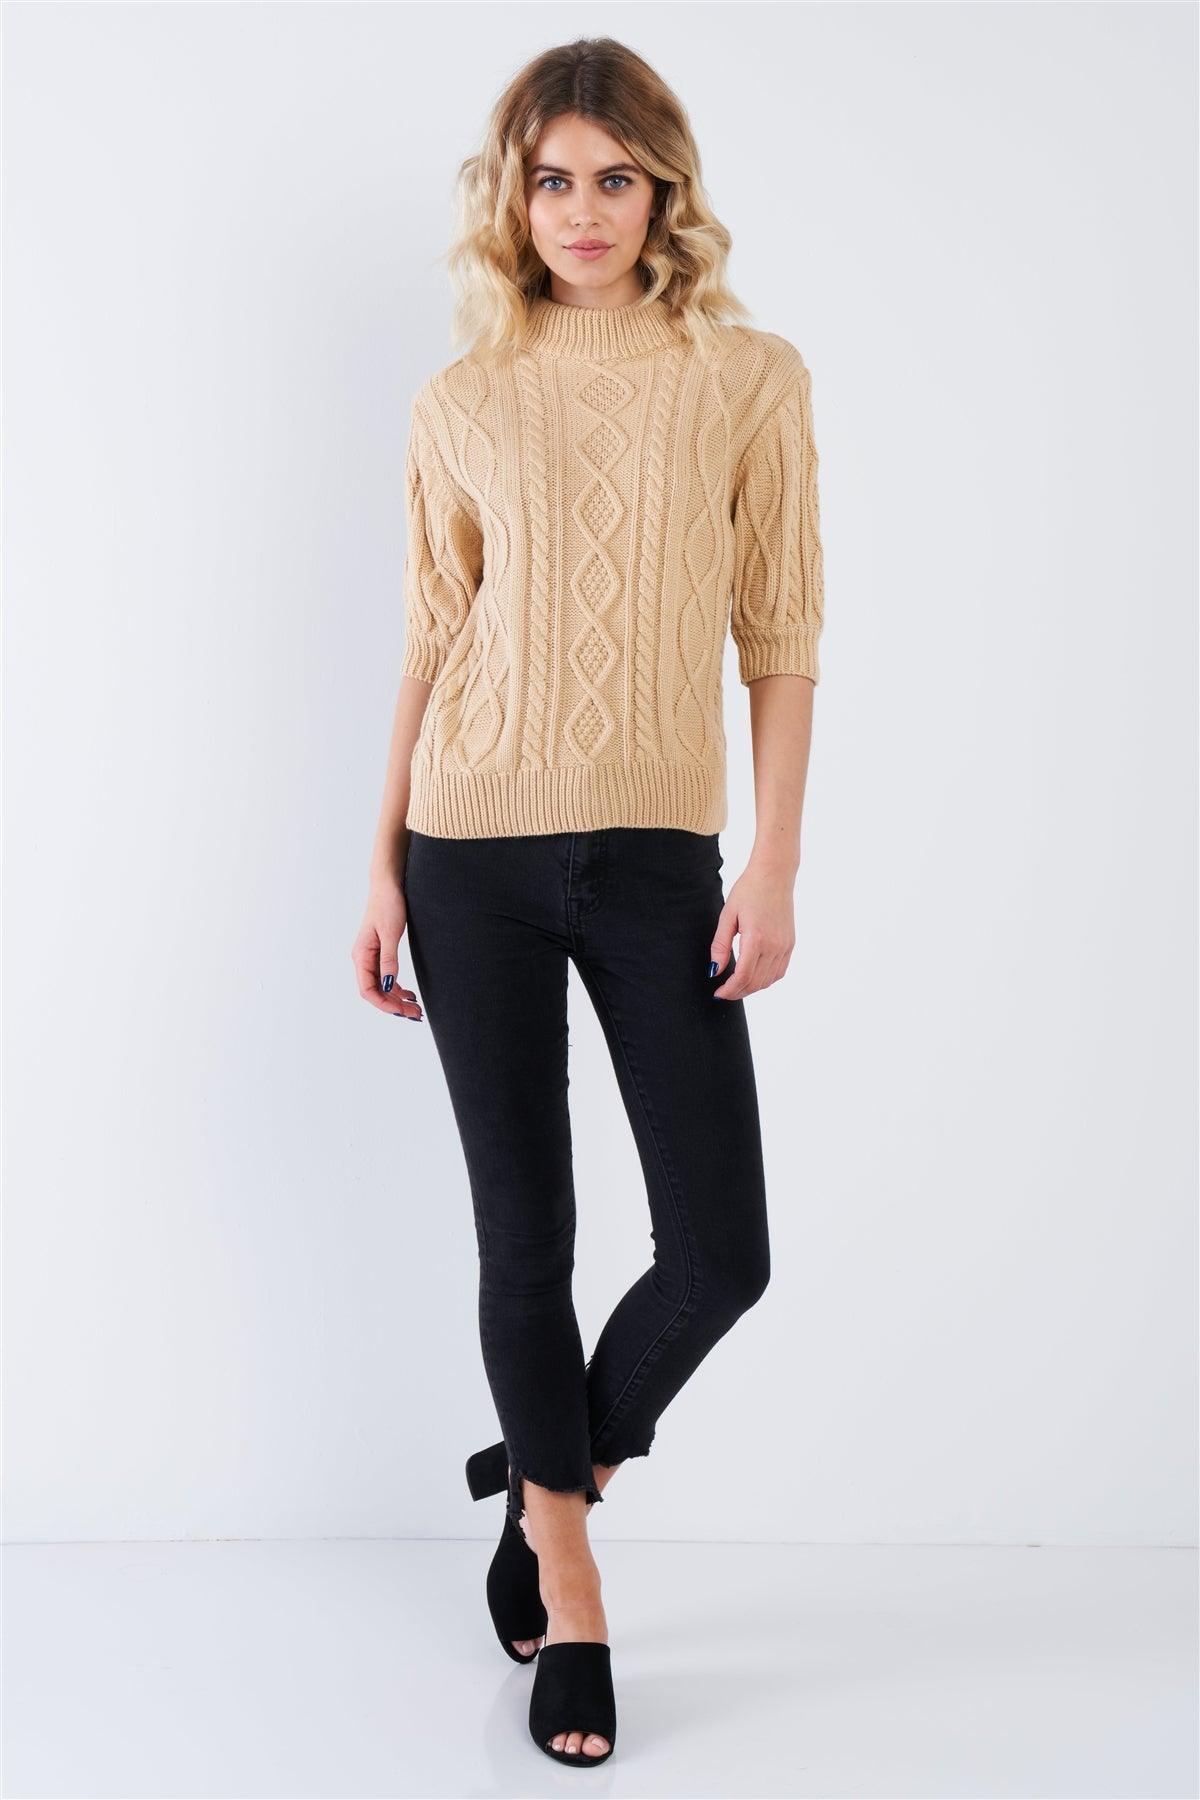 Beige Cable Knit Casual 3/4 Sleeve Mock Neck Chic Sweater